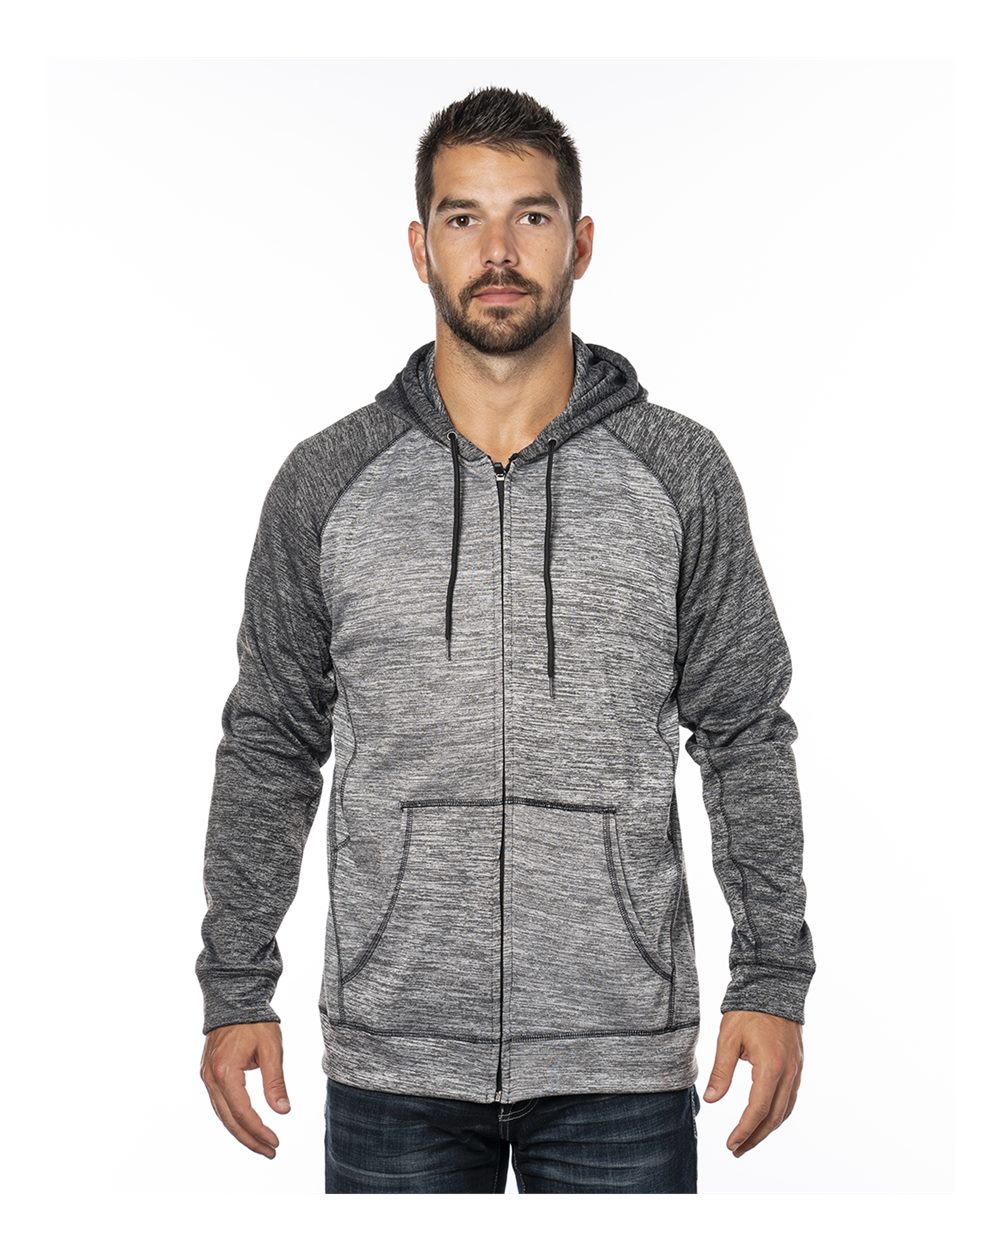 click to view Heather Grey/ Heather Charcoal